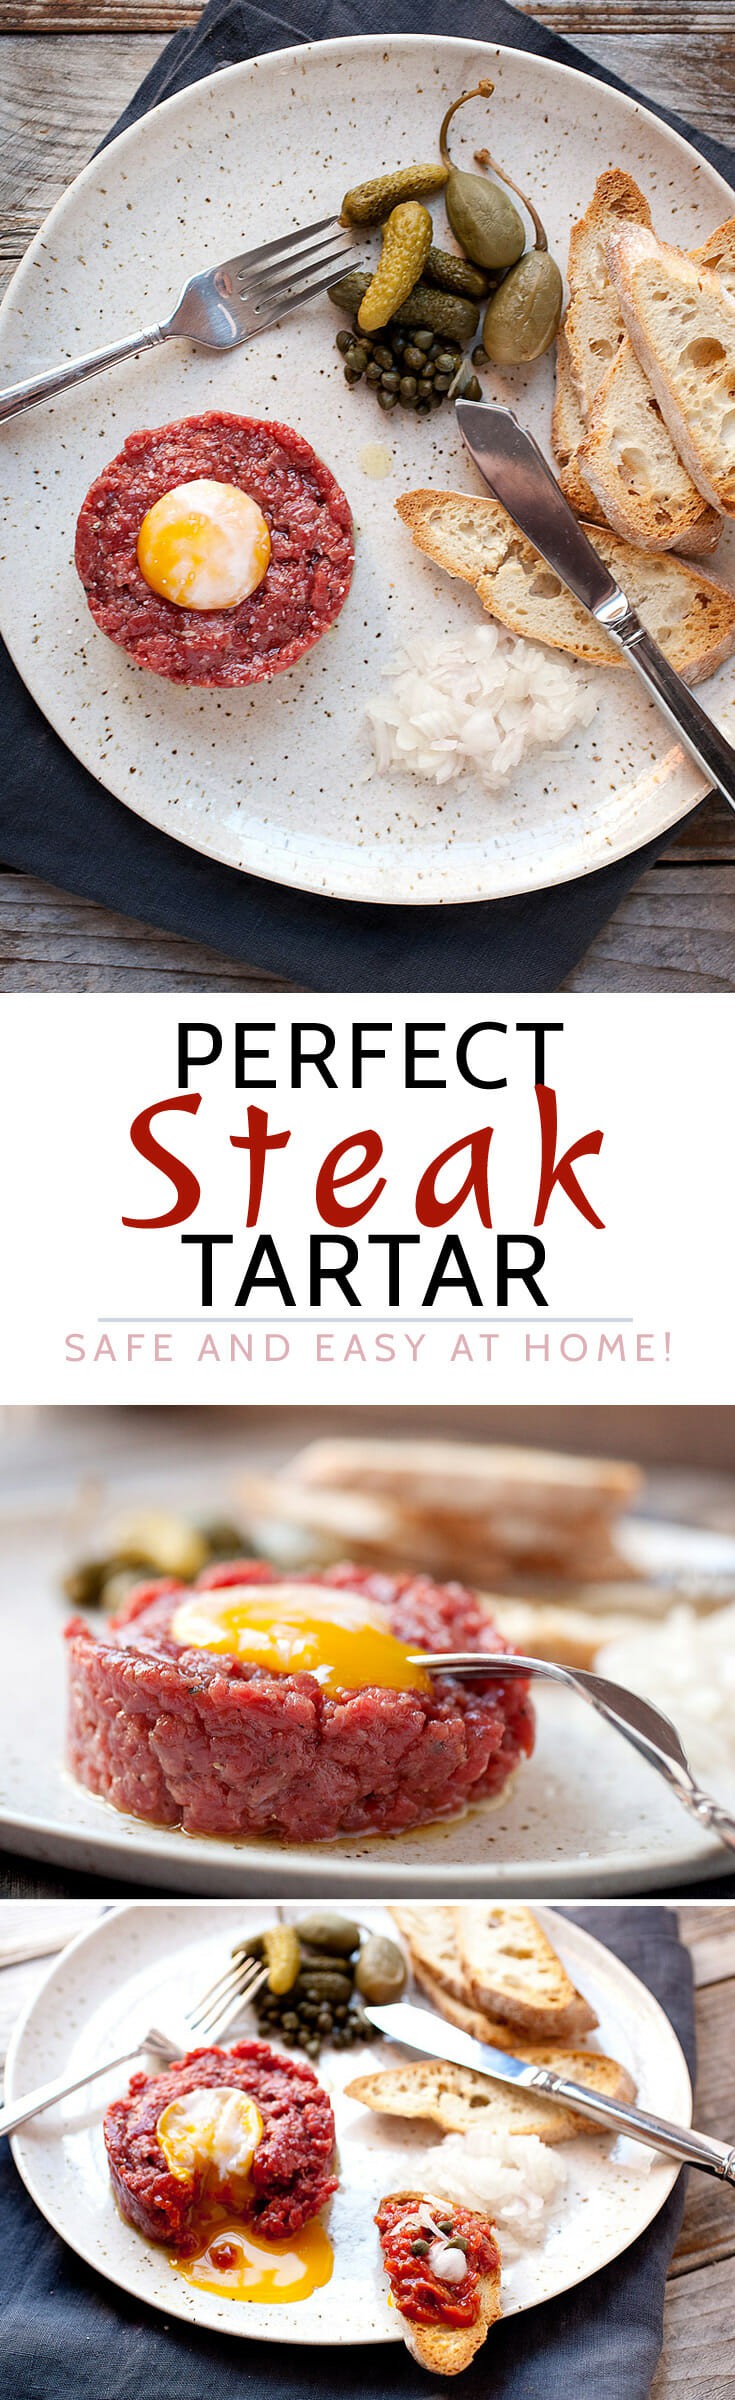 Perfect Steak Tartare at Home! Here's how to make the classic French appetizer SAFELY at home! It's really easy with a few simple tips and no stove required! Stop over-paying for it in fancy restaurants! | macheesmo.com #steak #tartare #homemade